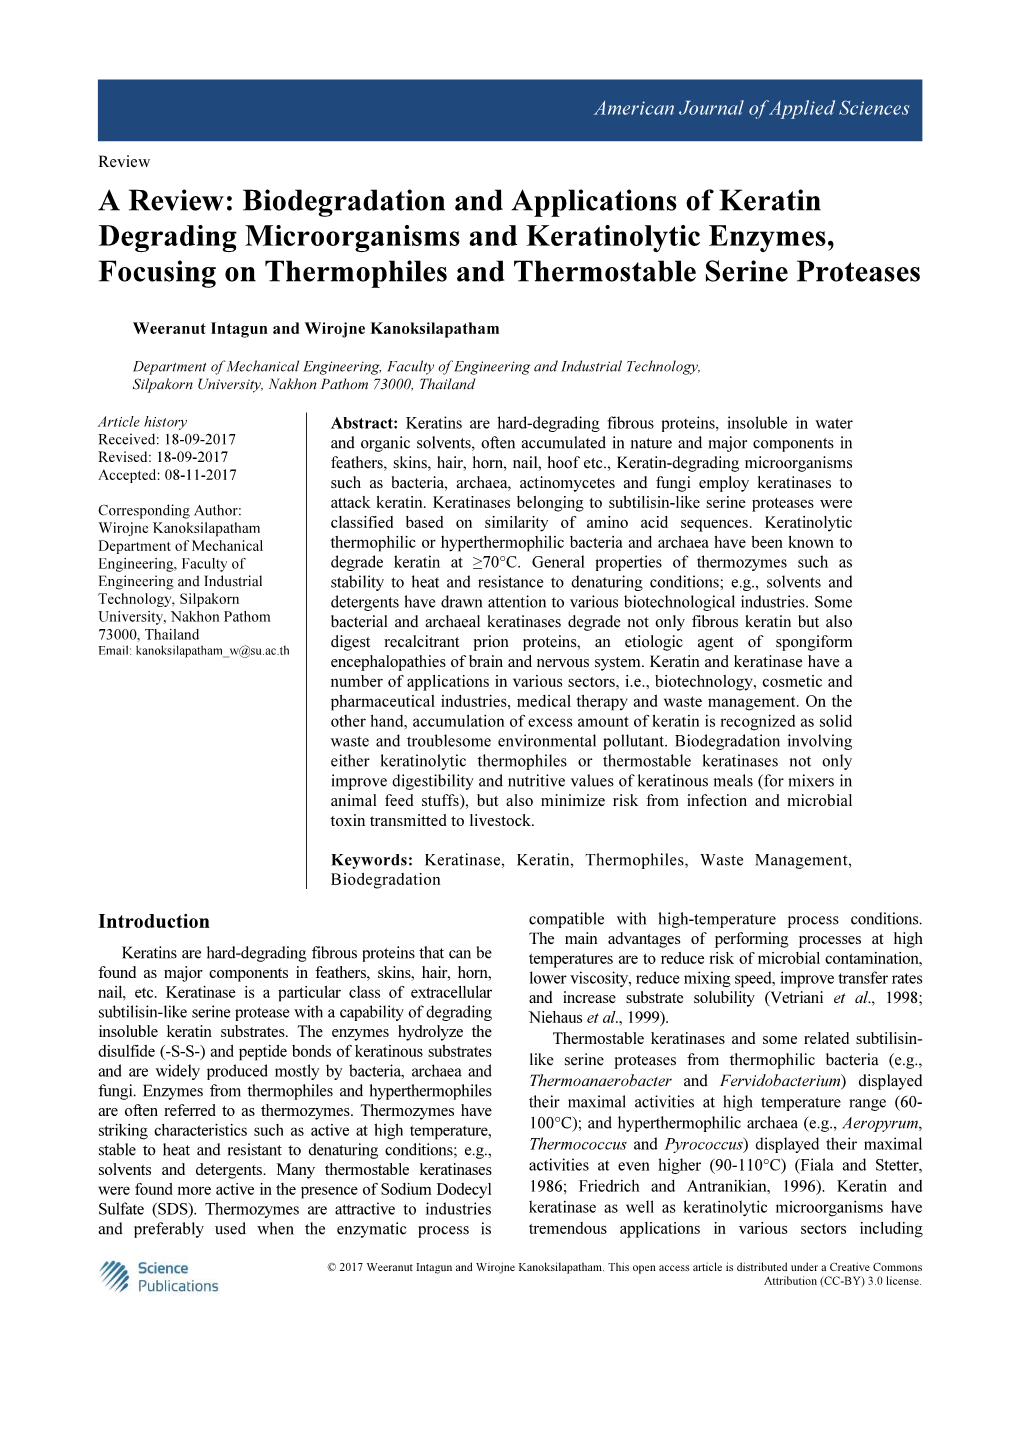 Biodegradation and Applications of Keratin Degrading Microorganisms and Keratinolytic Enzymes, Focusing on Thermophiles and Thermostable Serine Proteases